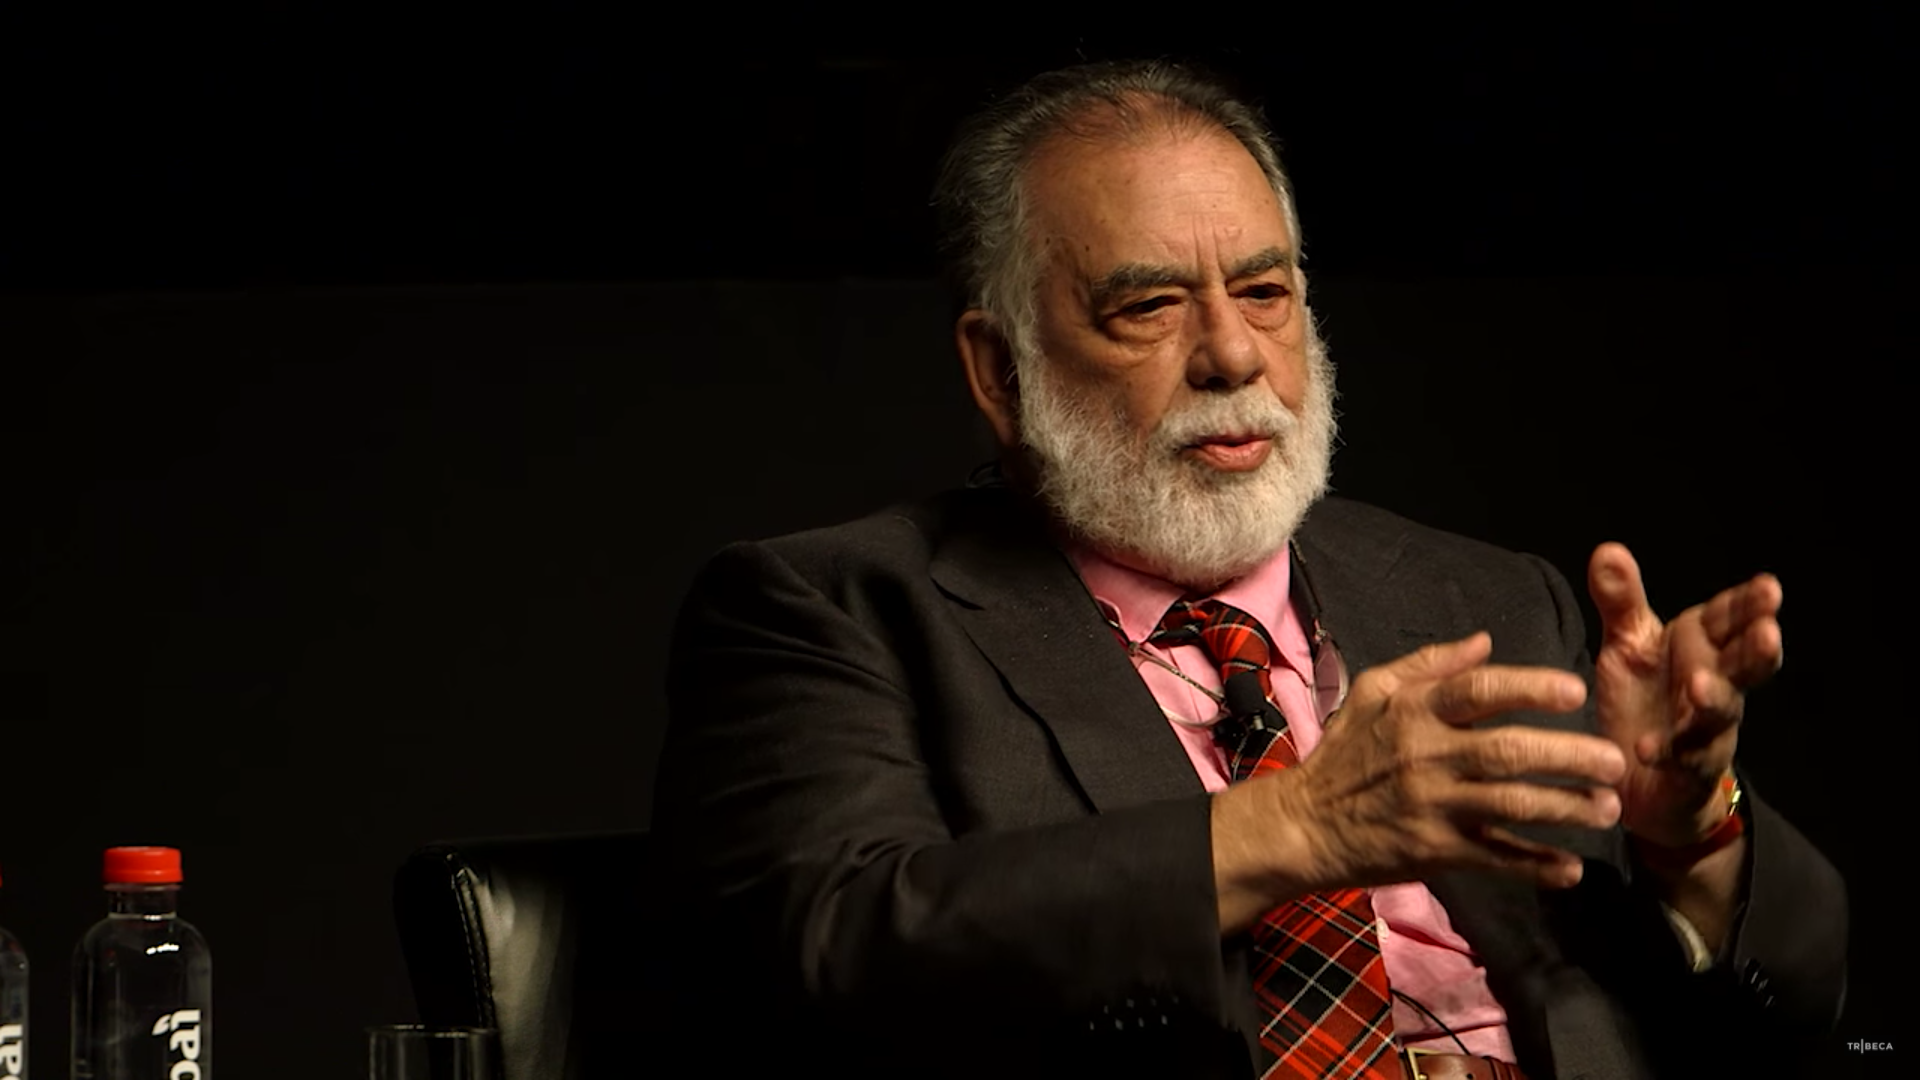 Francis Ford Coppola shares insight at the 2016 Tribeca Film Festival. Photo by: Tribeca / YouTube